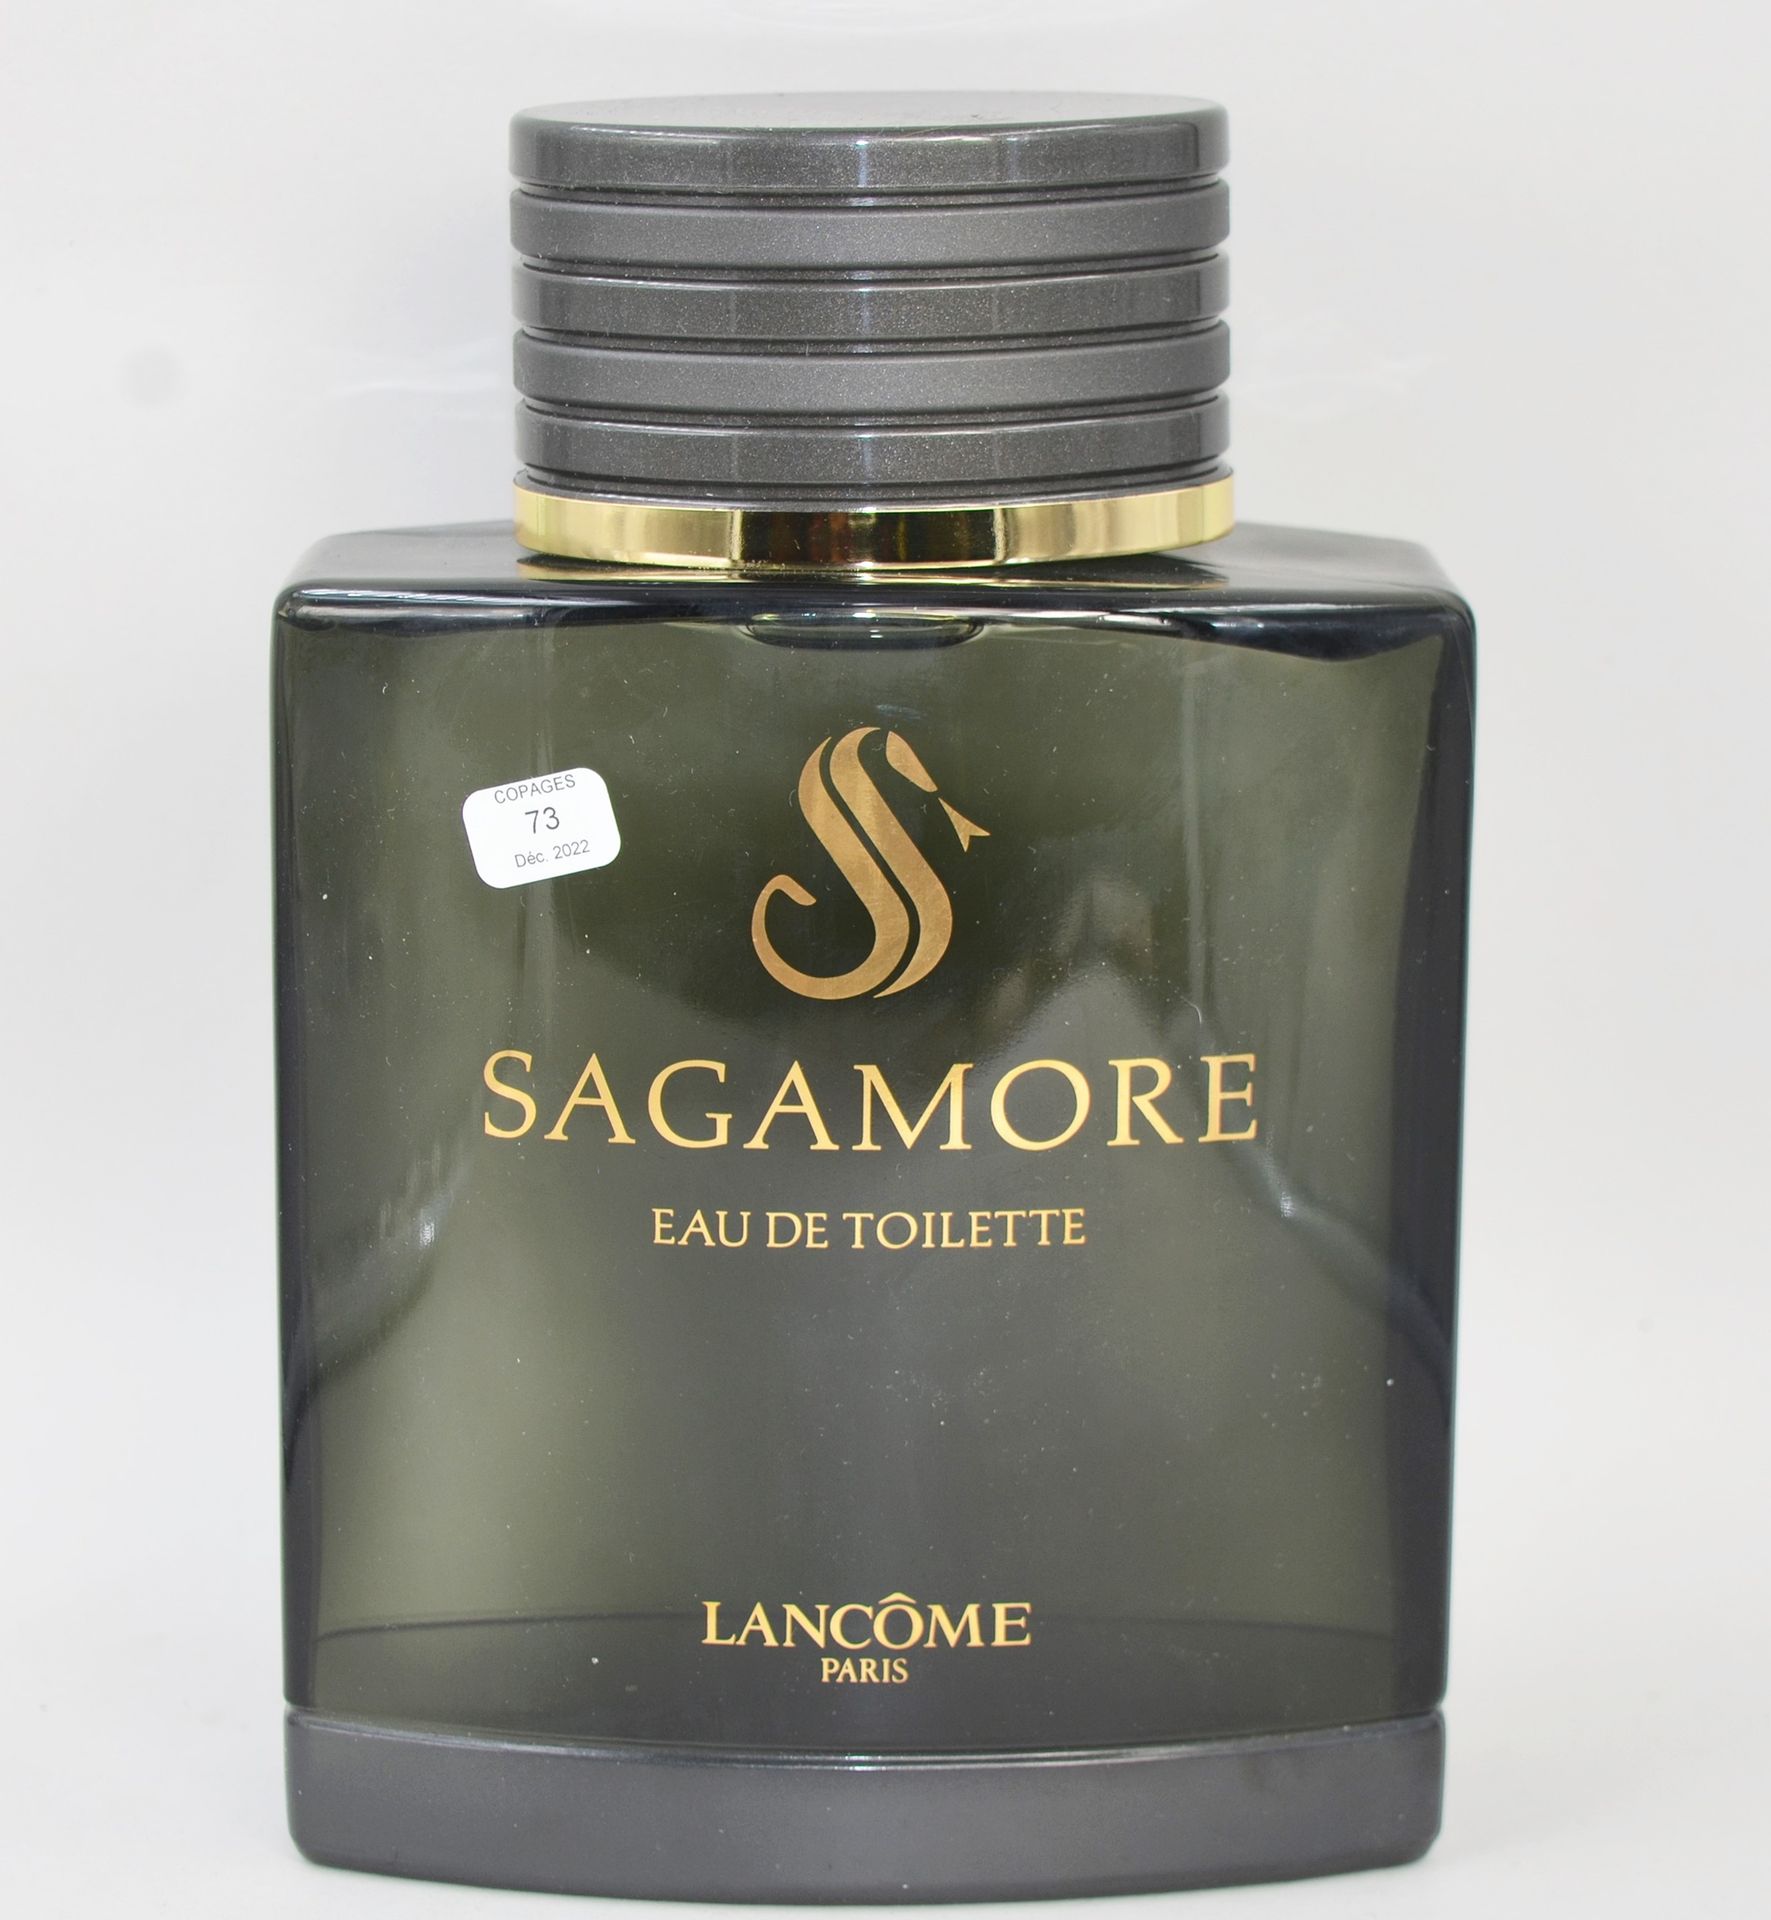 Null LANCOME "Sagamore

Giant dummy bottle of decoration out of glass, titled in&hellip;